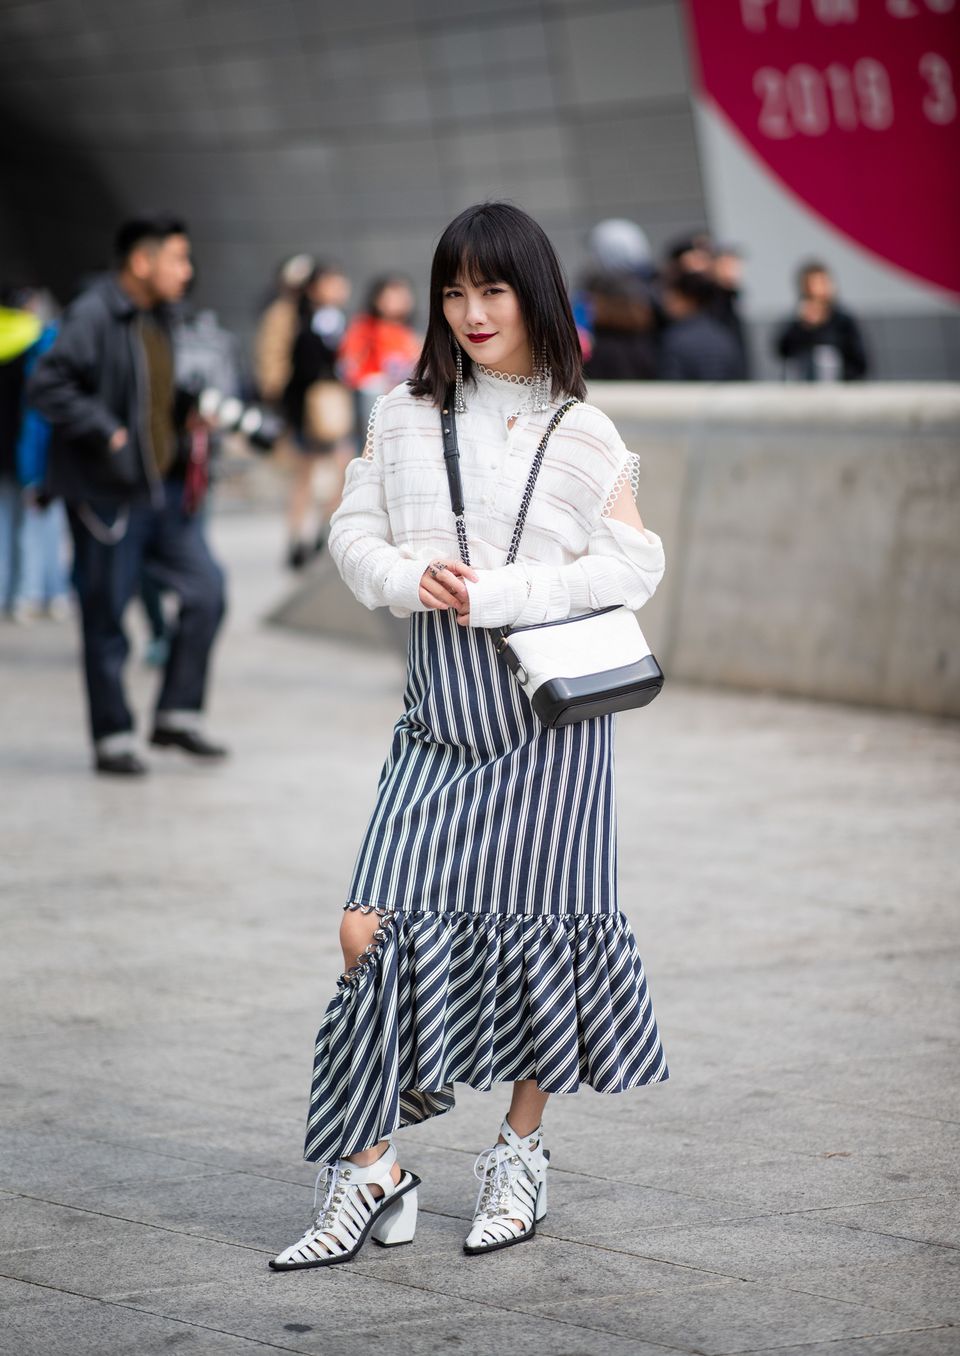 Seoul Street Style Photos Will Seriously Inspire You To Up Your Fashion Game Huffpost Uk Style 2905